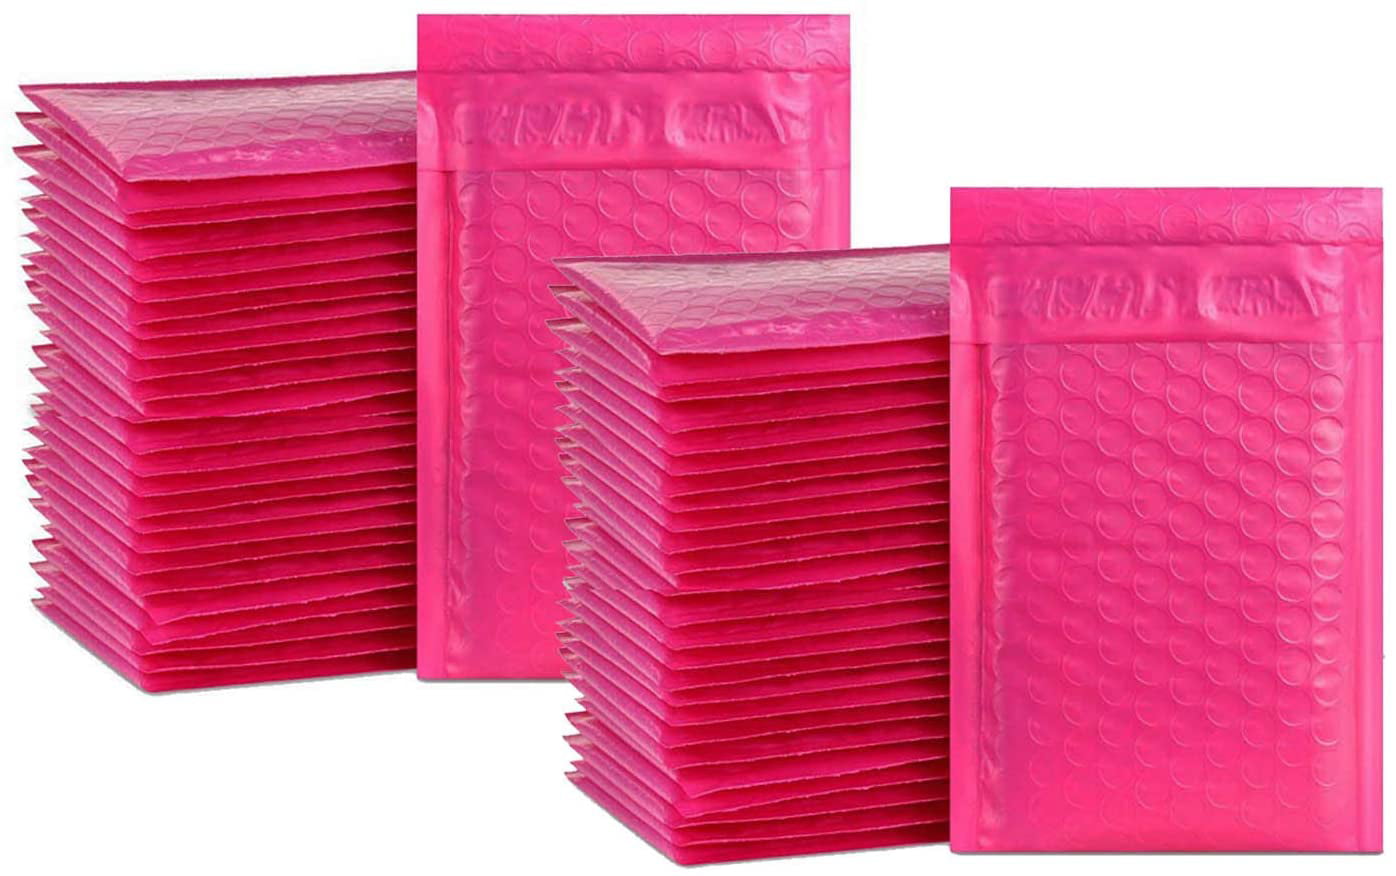 50x Pink Poly Bubble Bag Mailer Plastic Padded Envelope Shipping Bag Packaging 